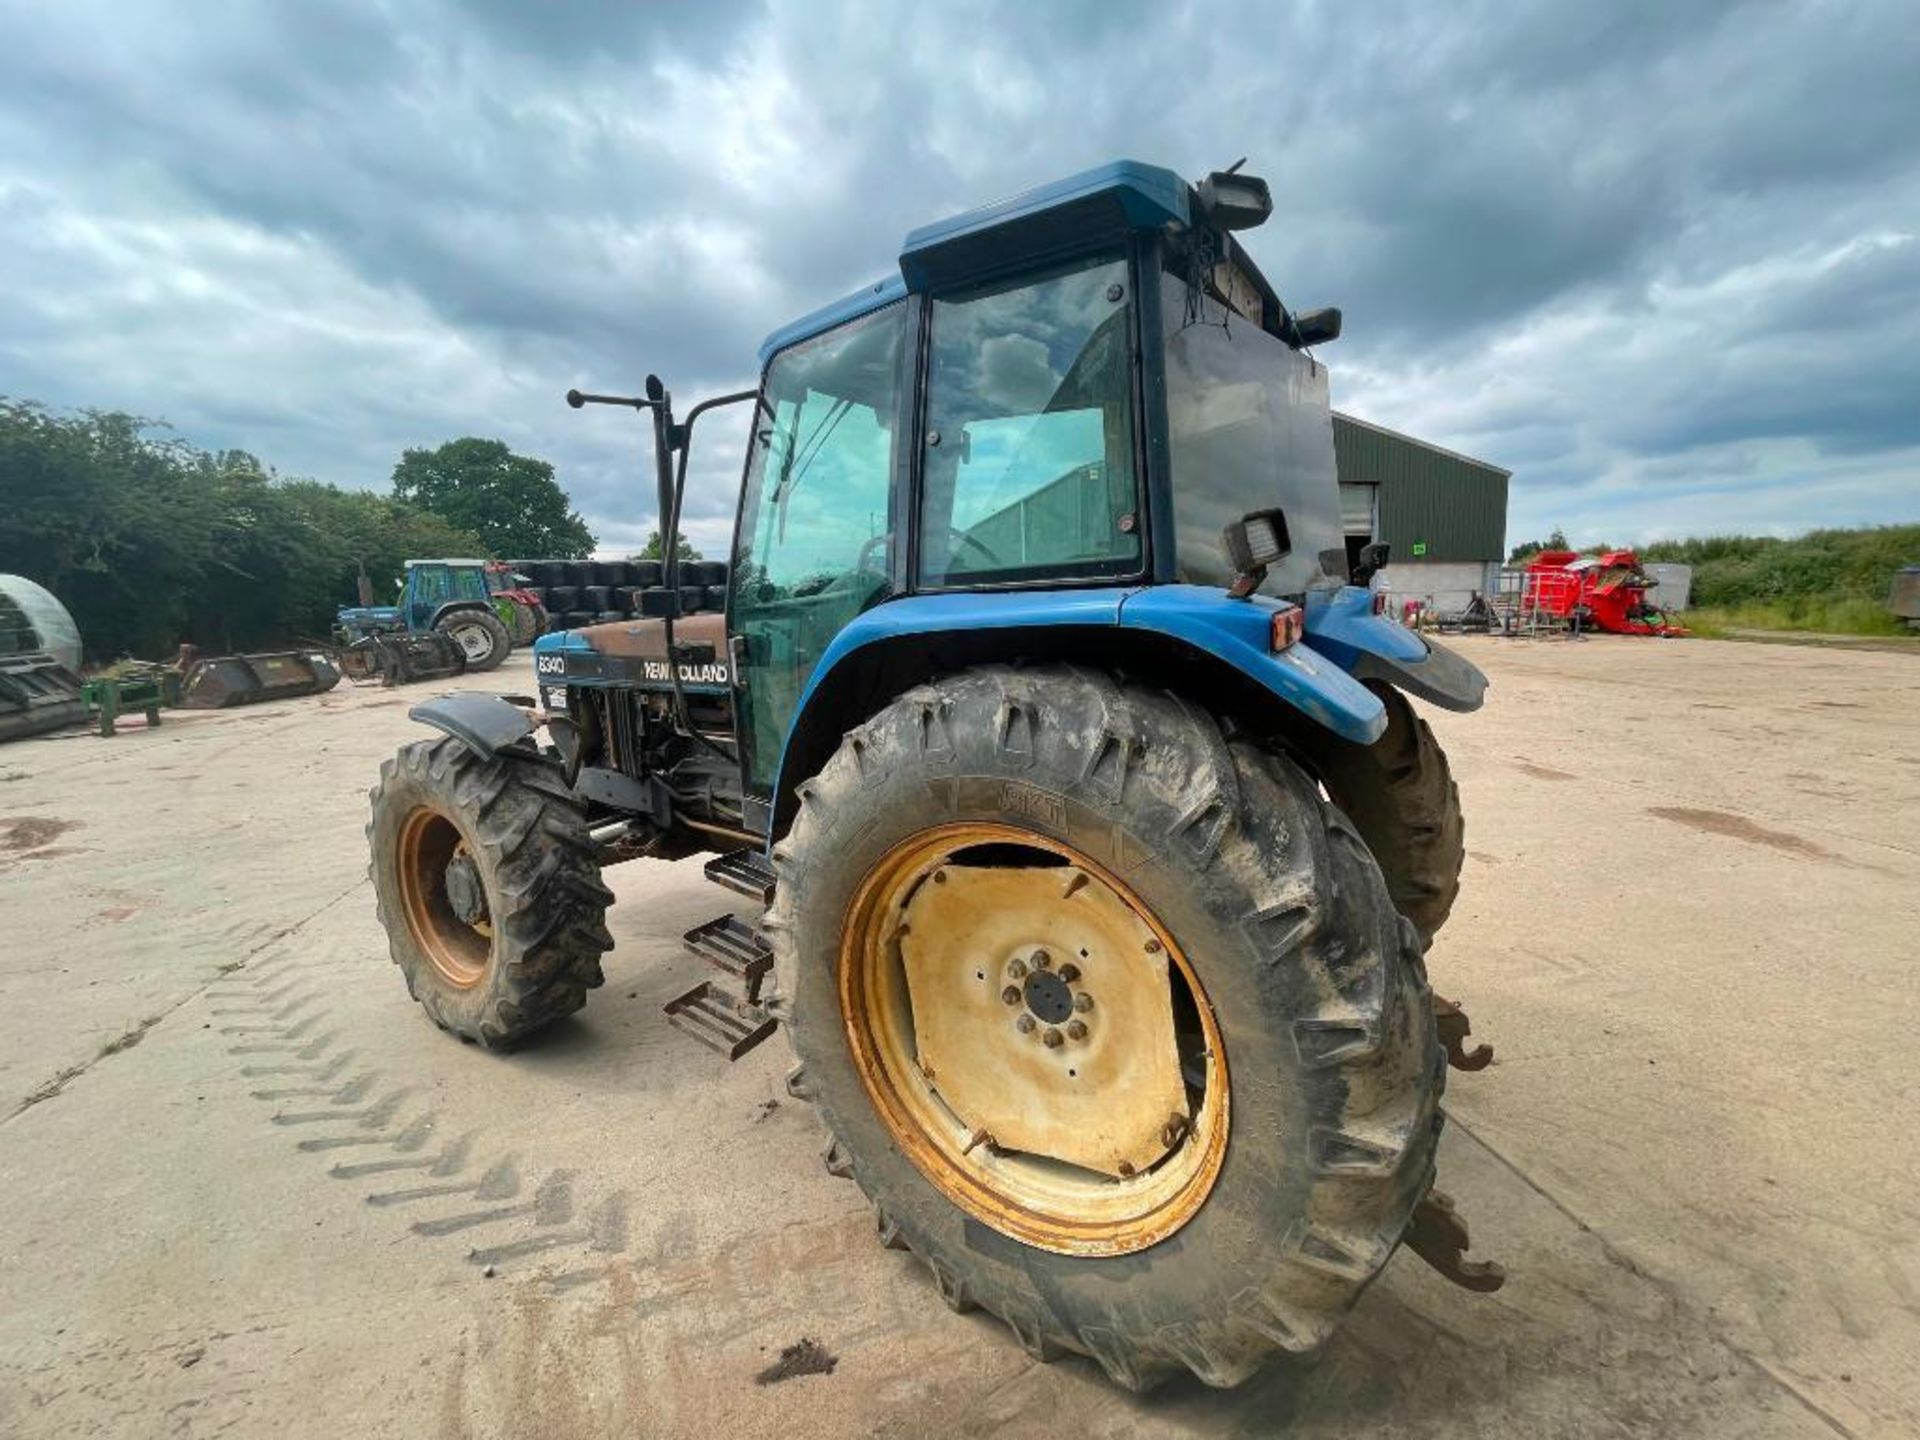 1997 New Holland 8340 4wd tractor with 2 manual spools on 14.9R28 front and 18.4R38 rear wheels and - Image 10 of 22